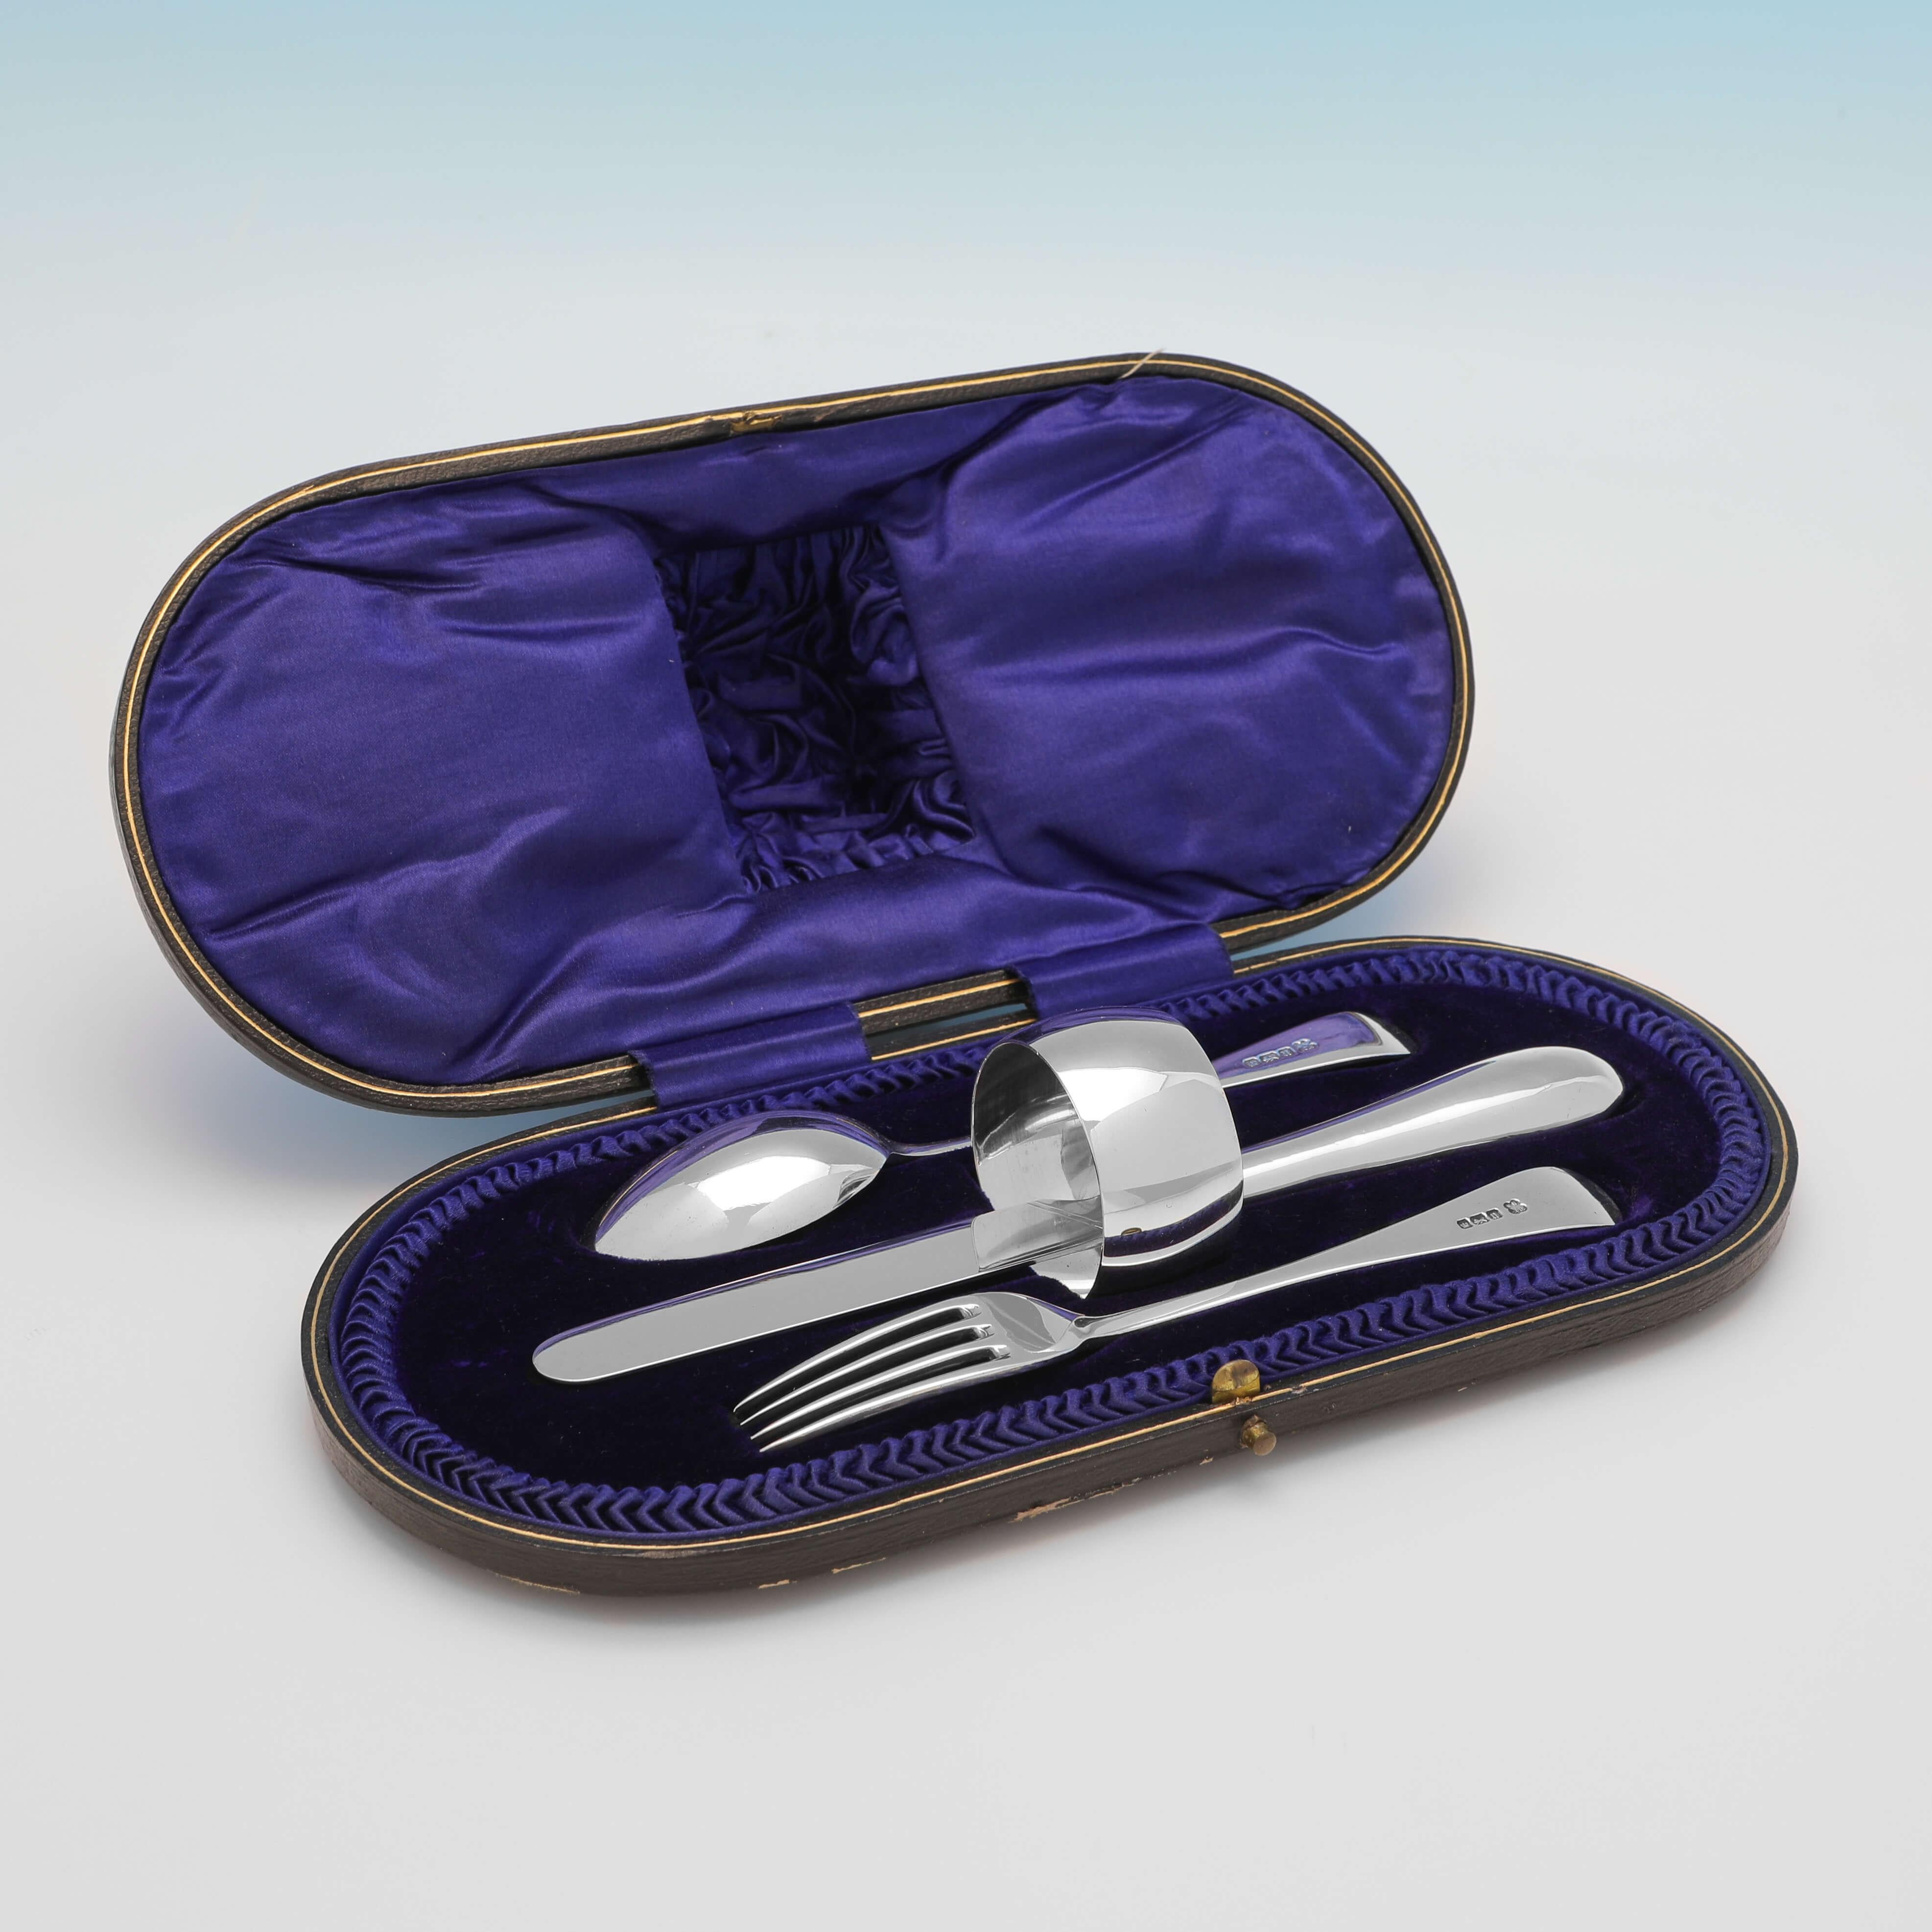 Hallmarked in Sheffield in 1911 and 1912 by Martin, Hall & Co., this handsome, Antique Sterling Silver Child's Set, comprises a knife, fork, spoon and napkin ring, all plain in design, and presented in their original box. 

The box measures